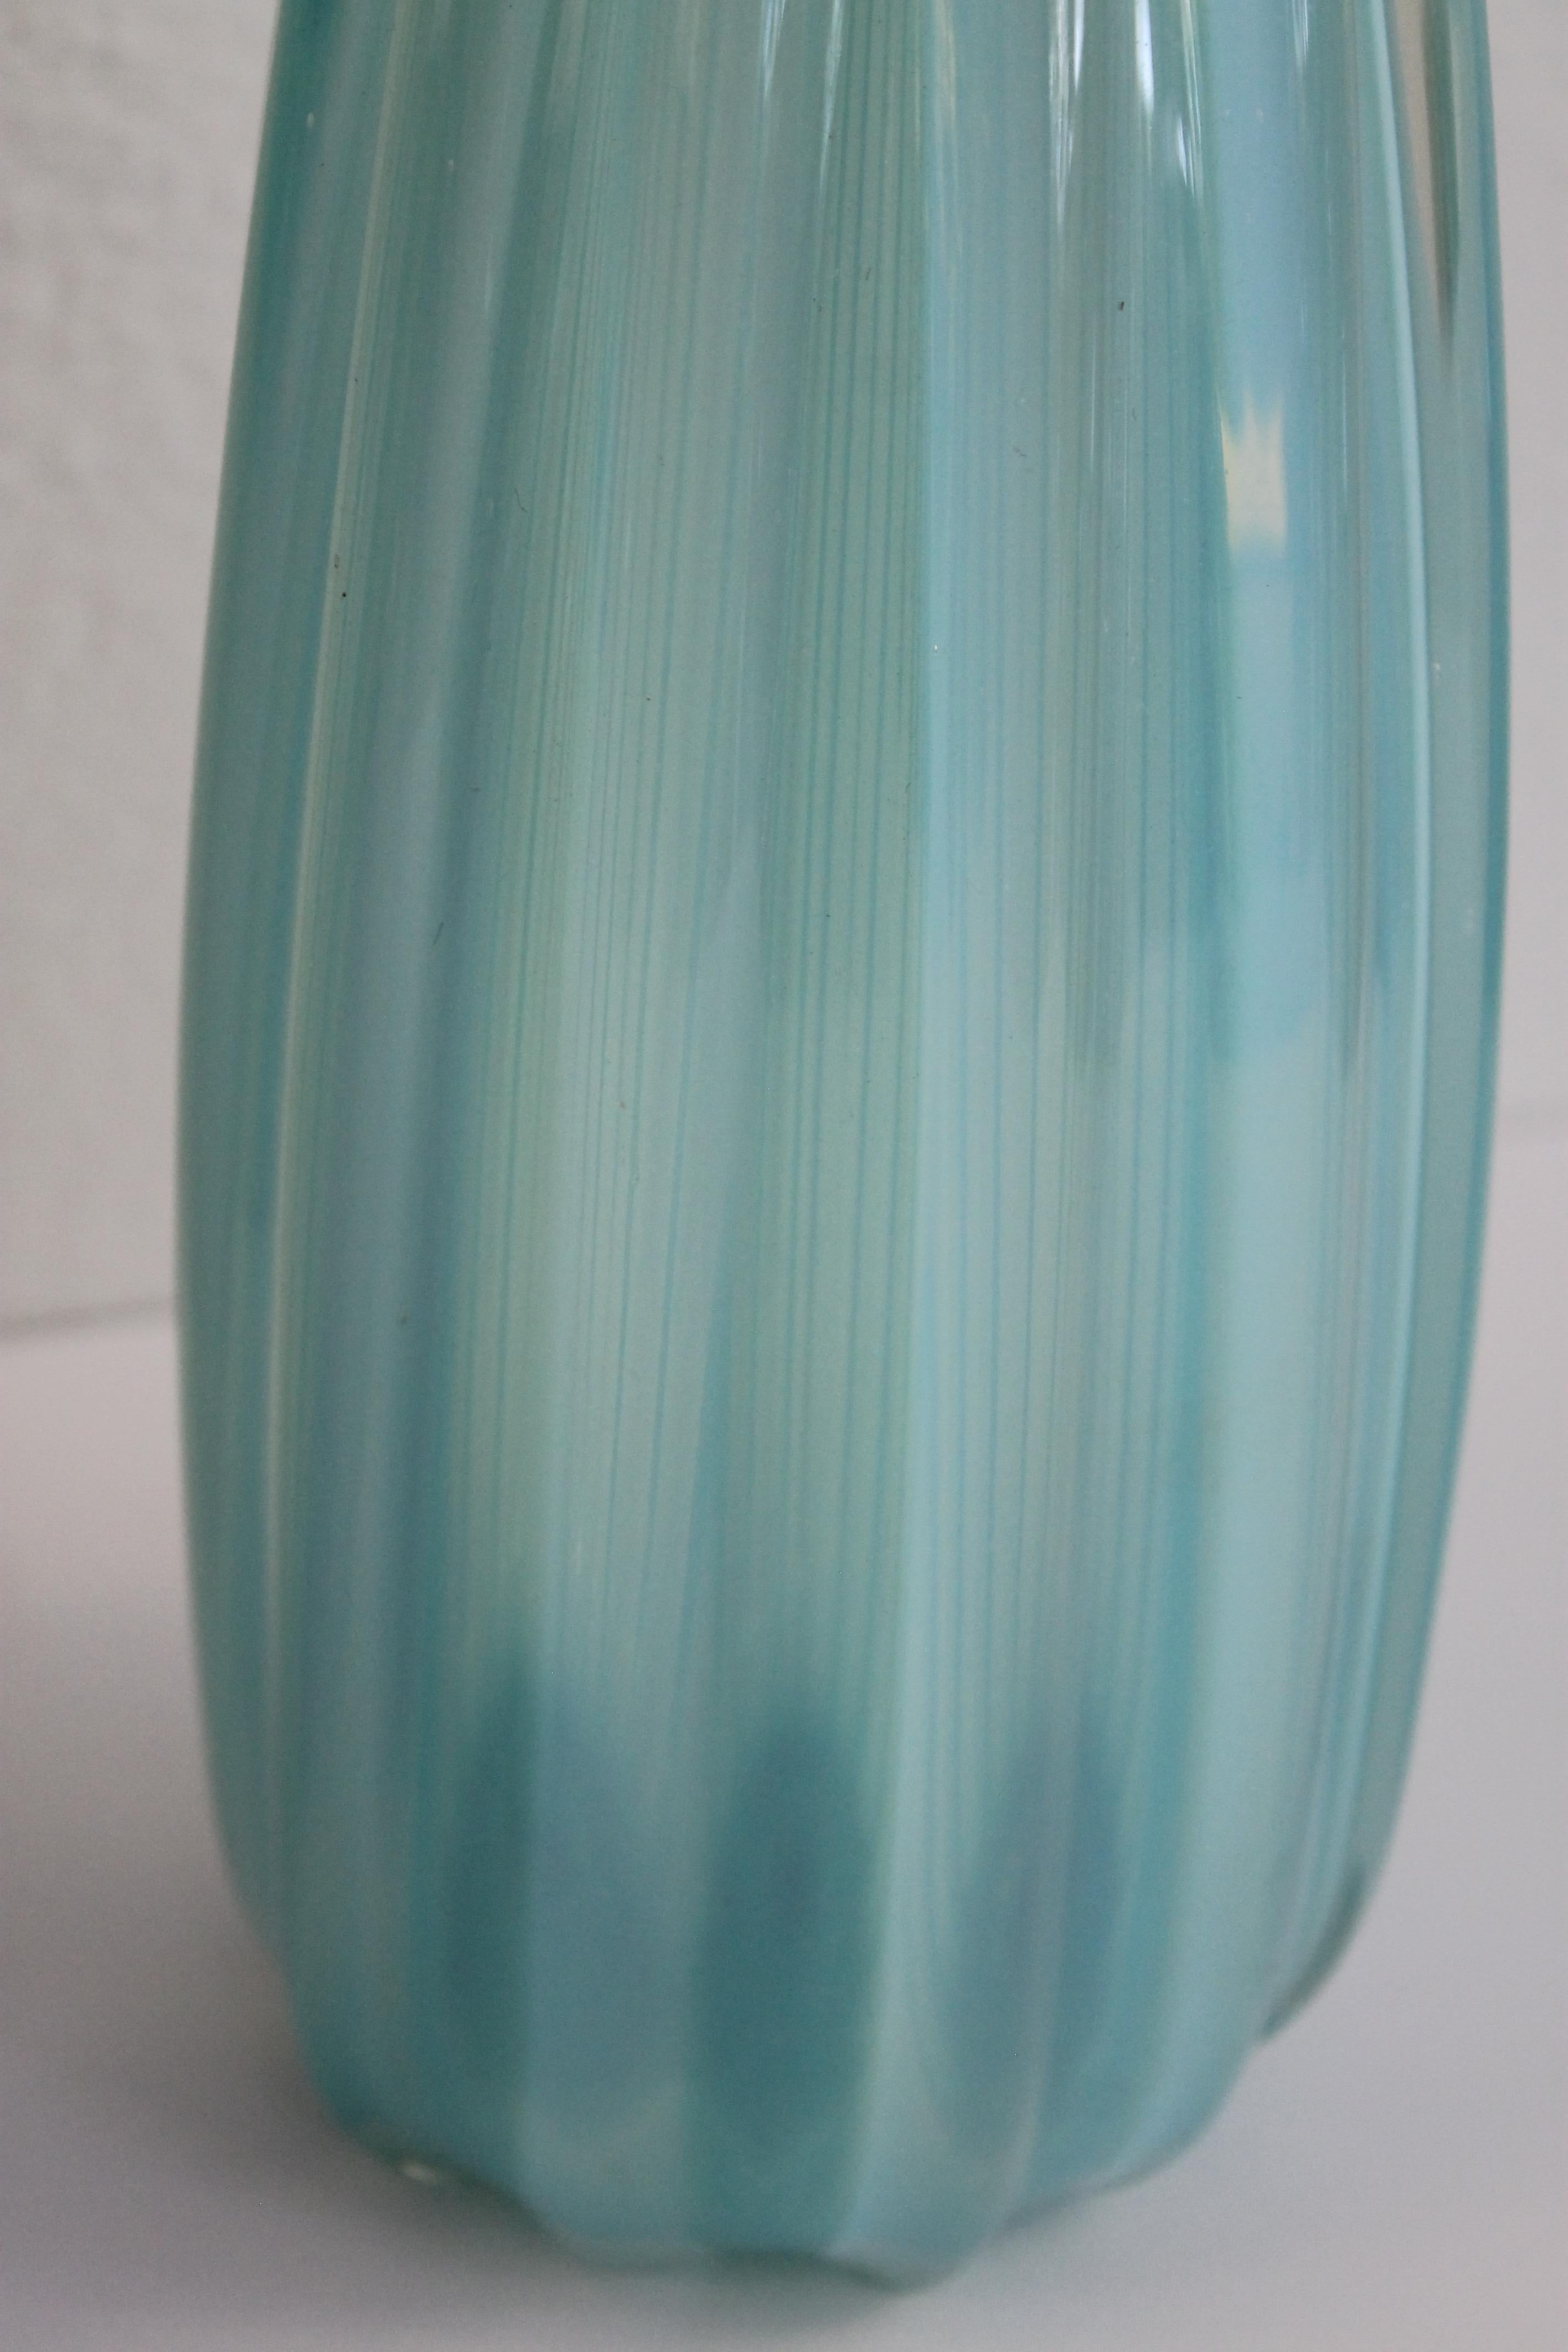 Pair of Murano Cranberry, Turquoise and Opaque Vases For Sale 2